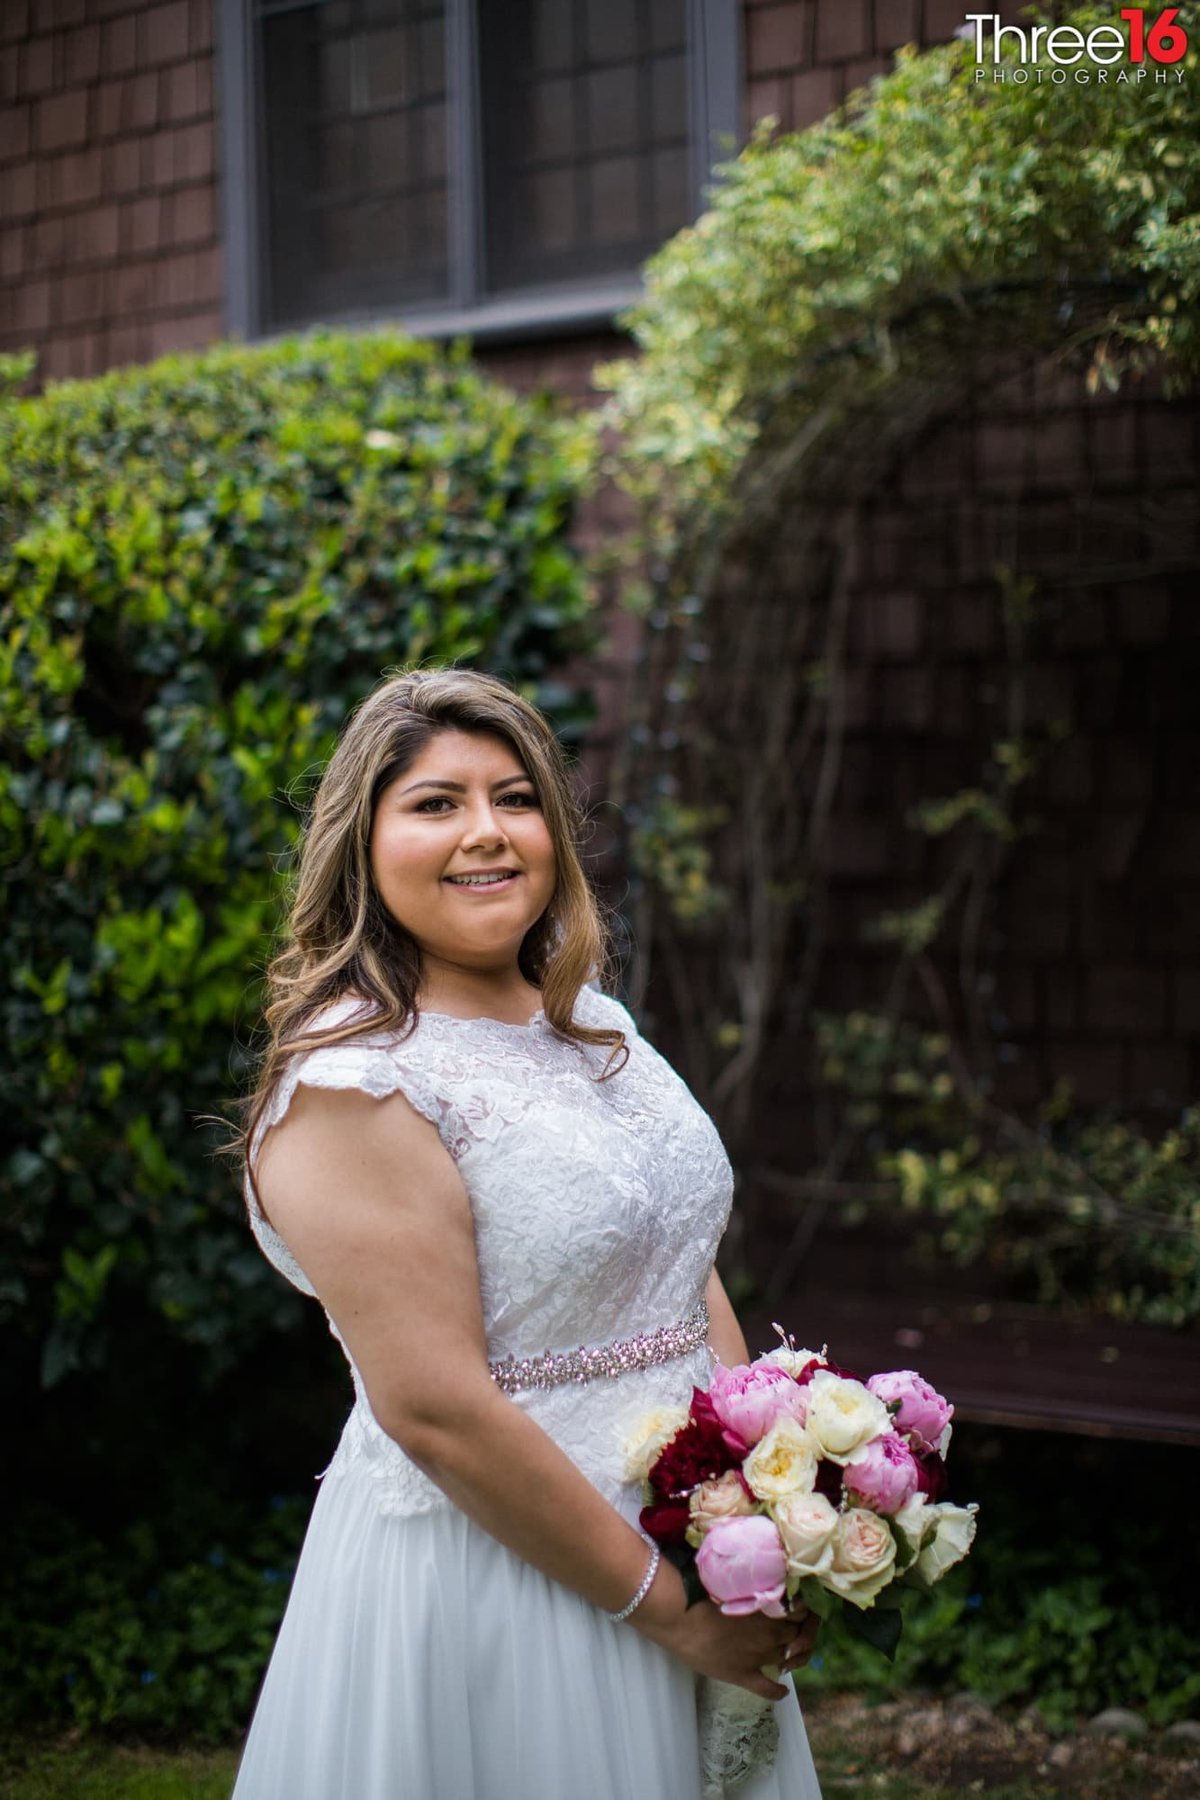 Bride poses for the wedding photographer with her bouquet